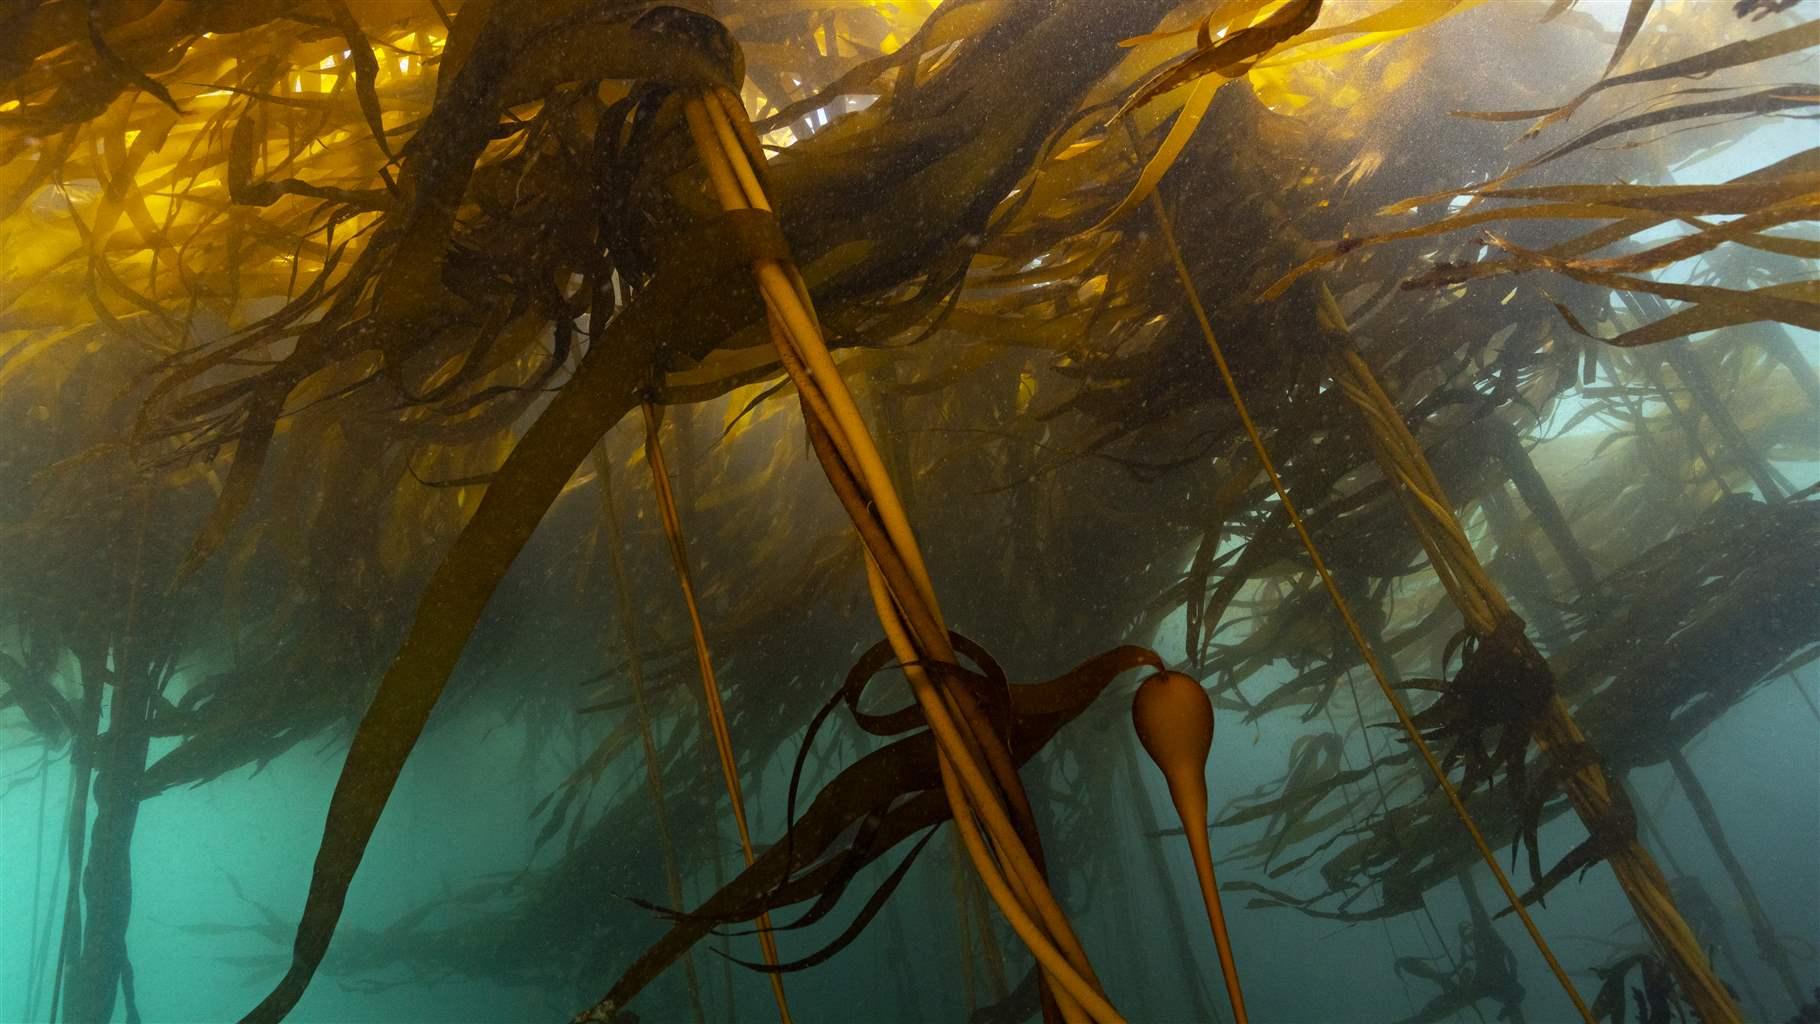 An underwater view shows tall, skinny, brown plants extending from the seafloor to near the sunlit surface. The plants feature stalks that vaguely resemble the shape of carrots—but much longer—topped with long, reedy leaves that extend horizontally with the prevailing current.